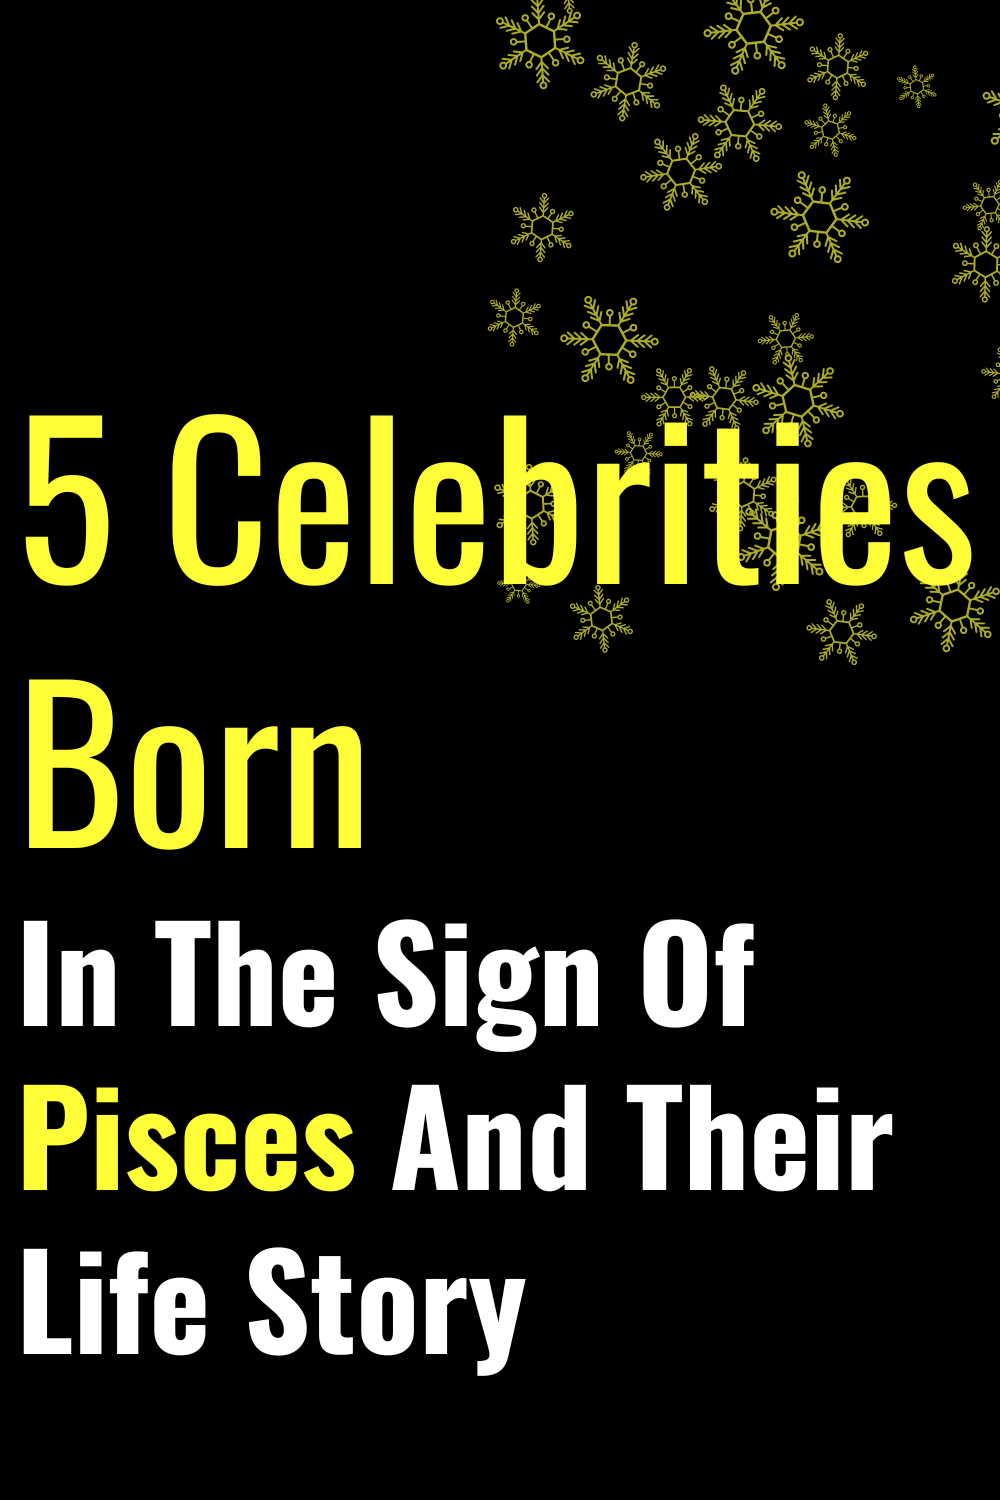 5 Celebrities Born In The Sign Of Pisces And Their Life Story